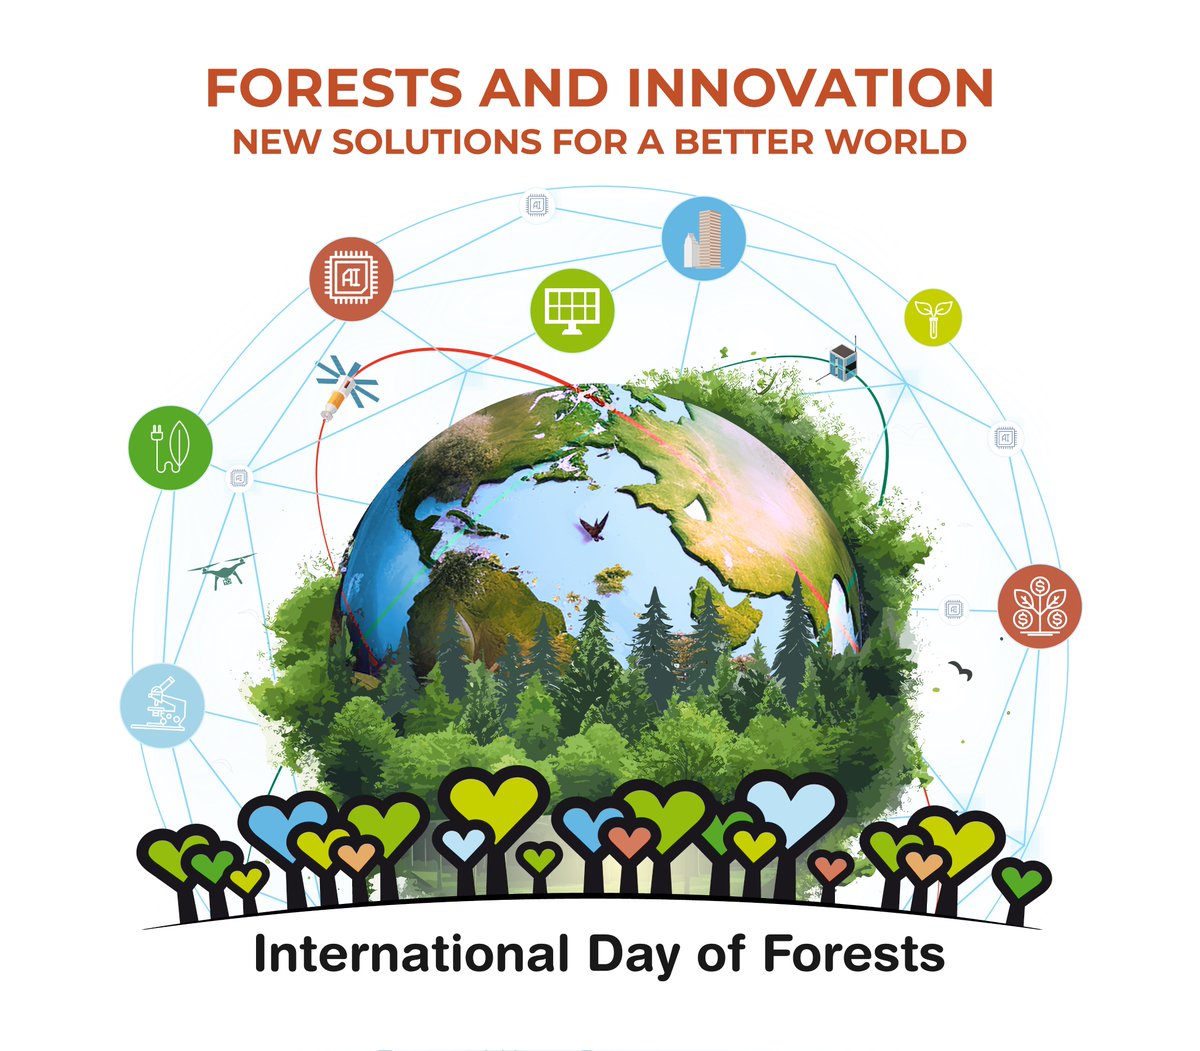 Join #GFOI partners at the hybrid event “How innovation is driving change in forestry” in celebration of the International Day of Forests! 📅21 March ⏰13.00-18.00 (UTC +1) Learn more at bit.ly/48Jflv4 #ForestDay #IntlForestDay #GenerationRestoration